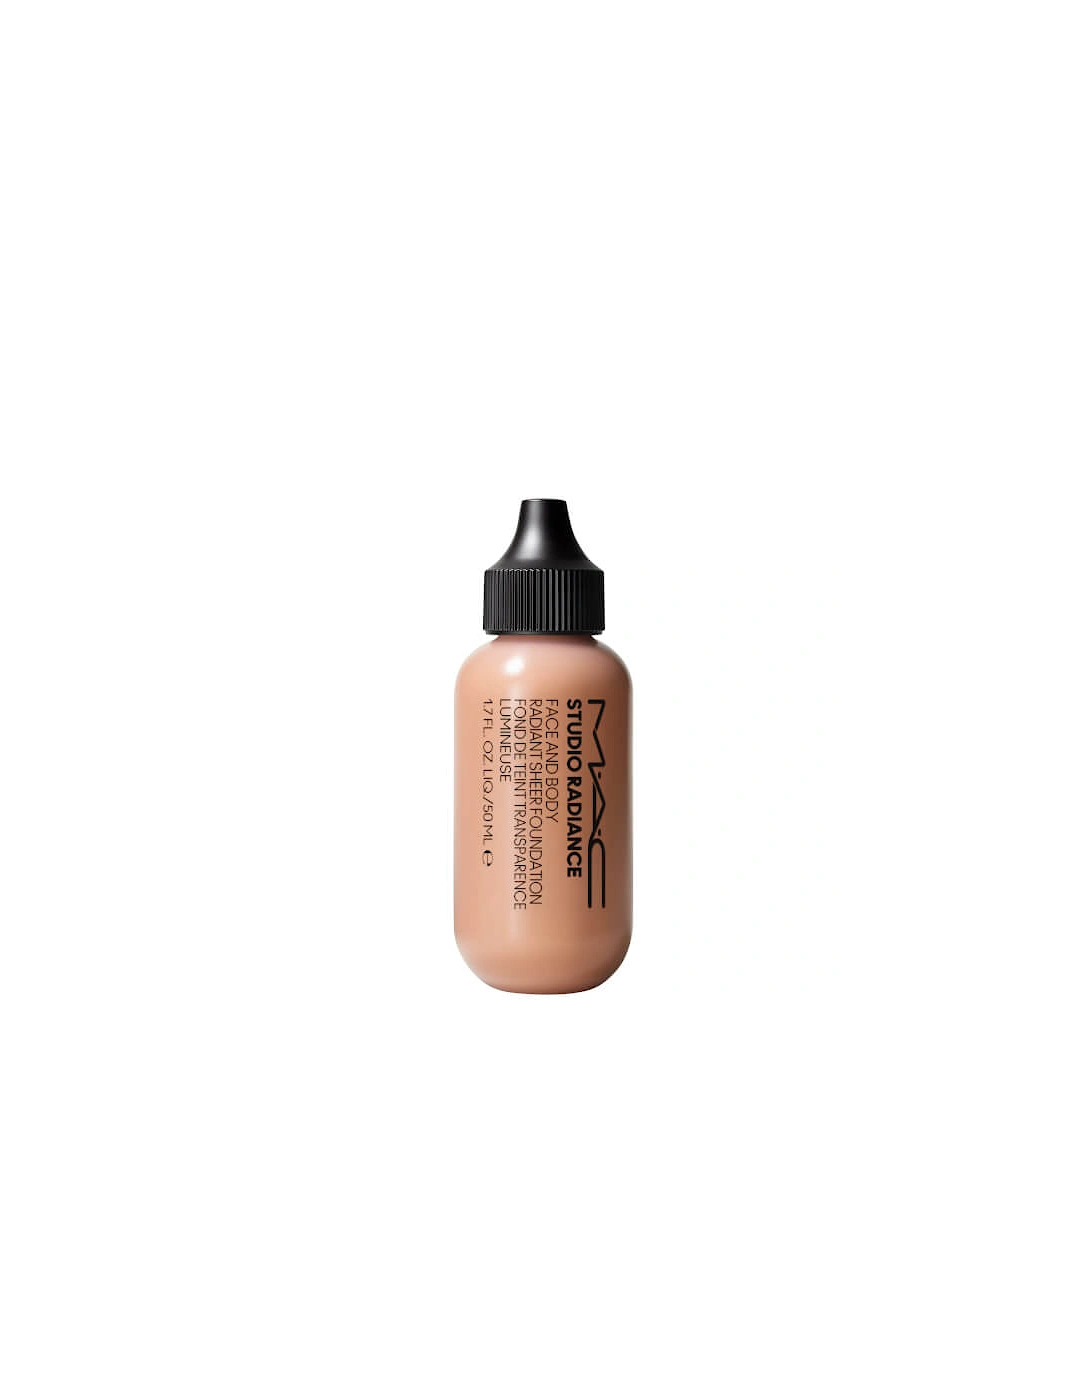 Studio Face and Body Radiant Sheer Foundation - W2, 2 of 1